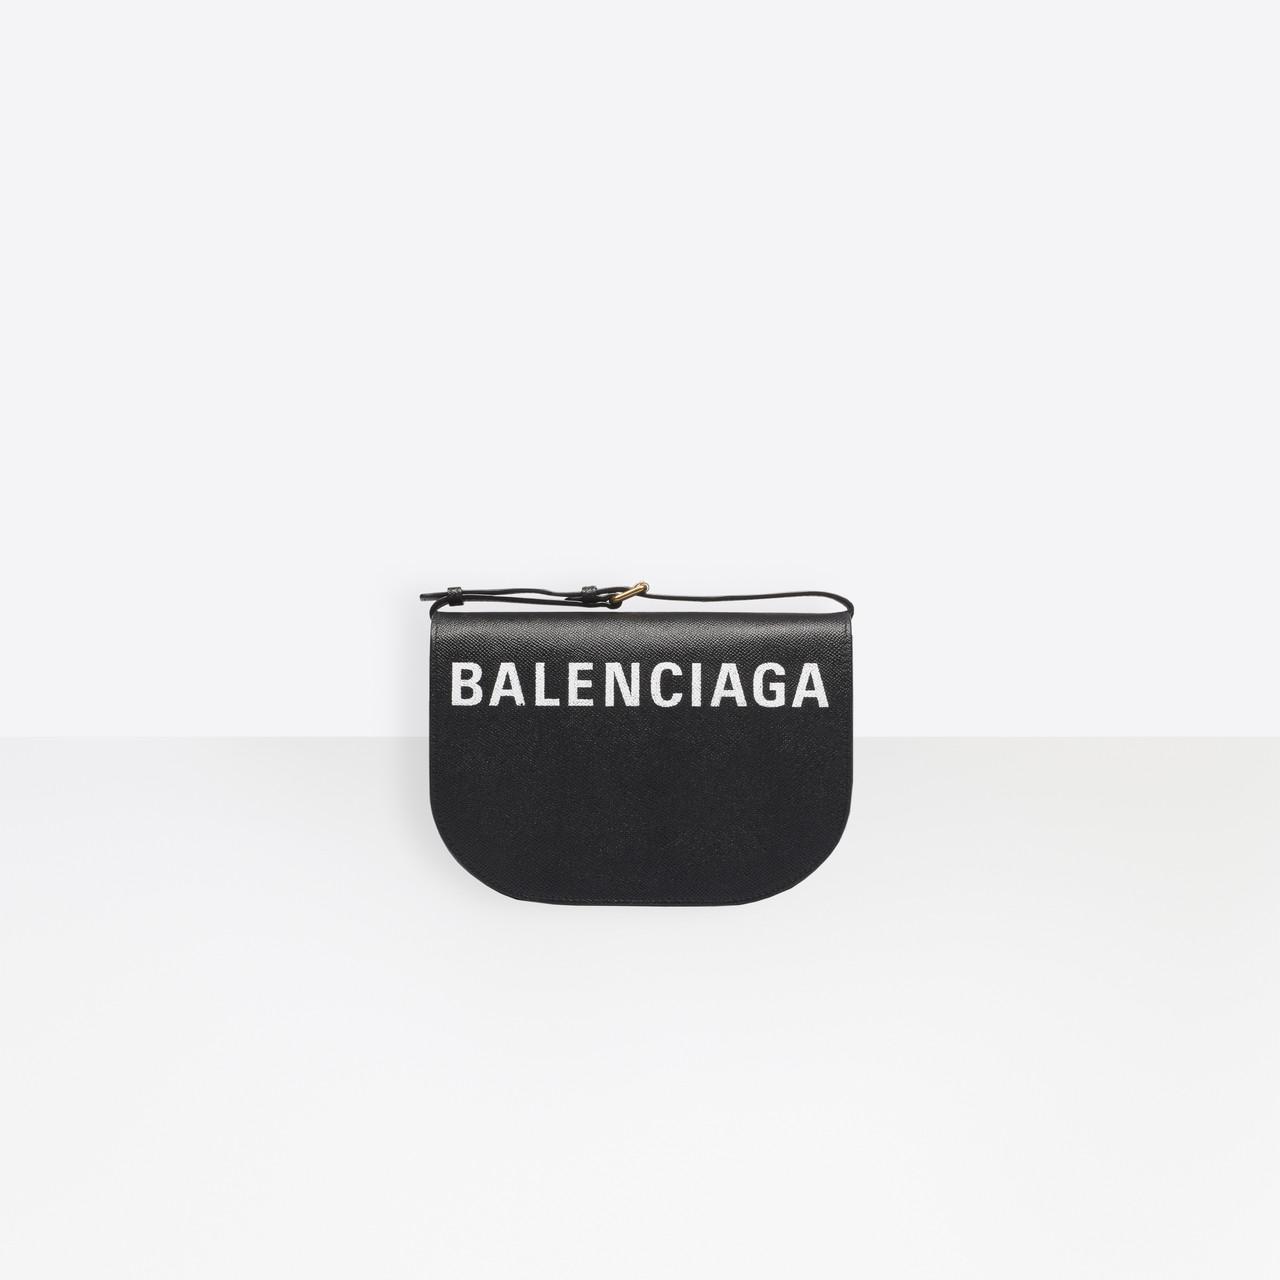 Balenciaga Leather Ville Day Bag S in Black - Lyst